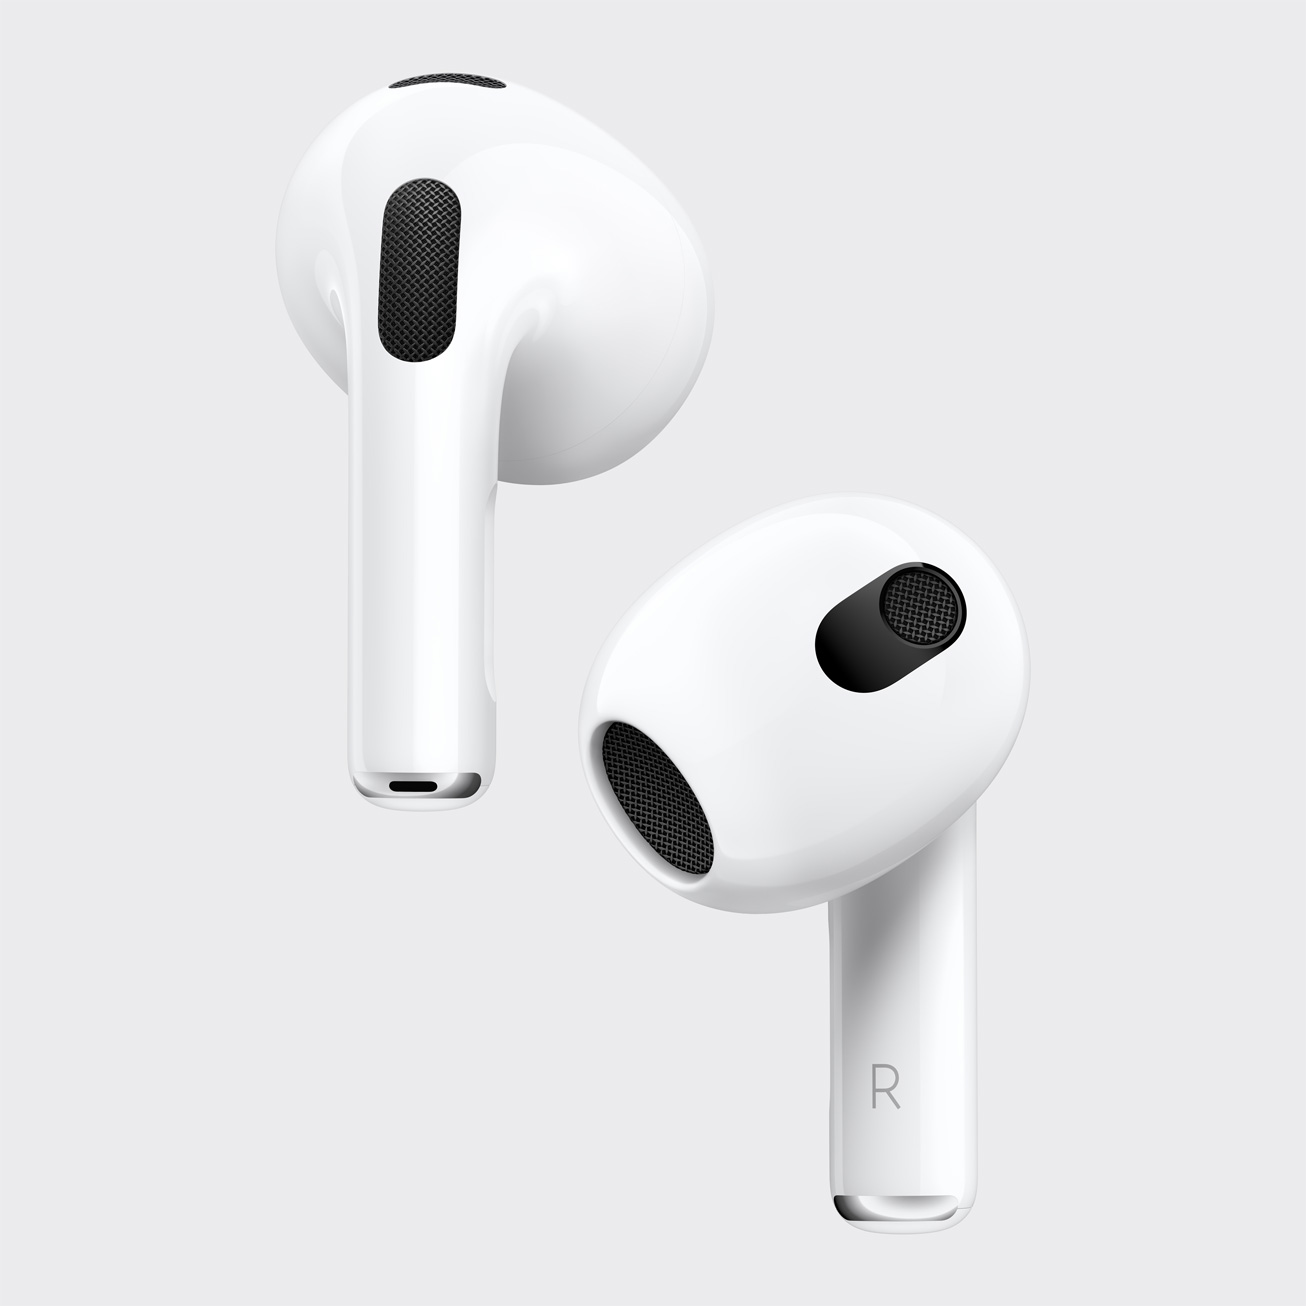 Apple New Airpods